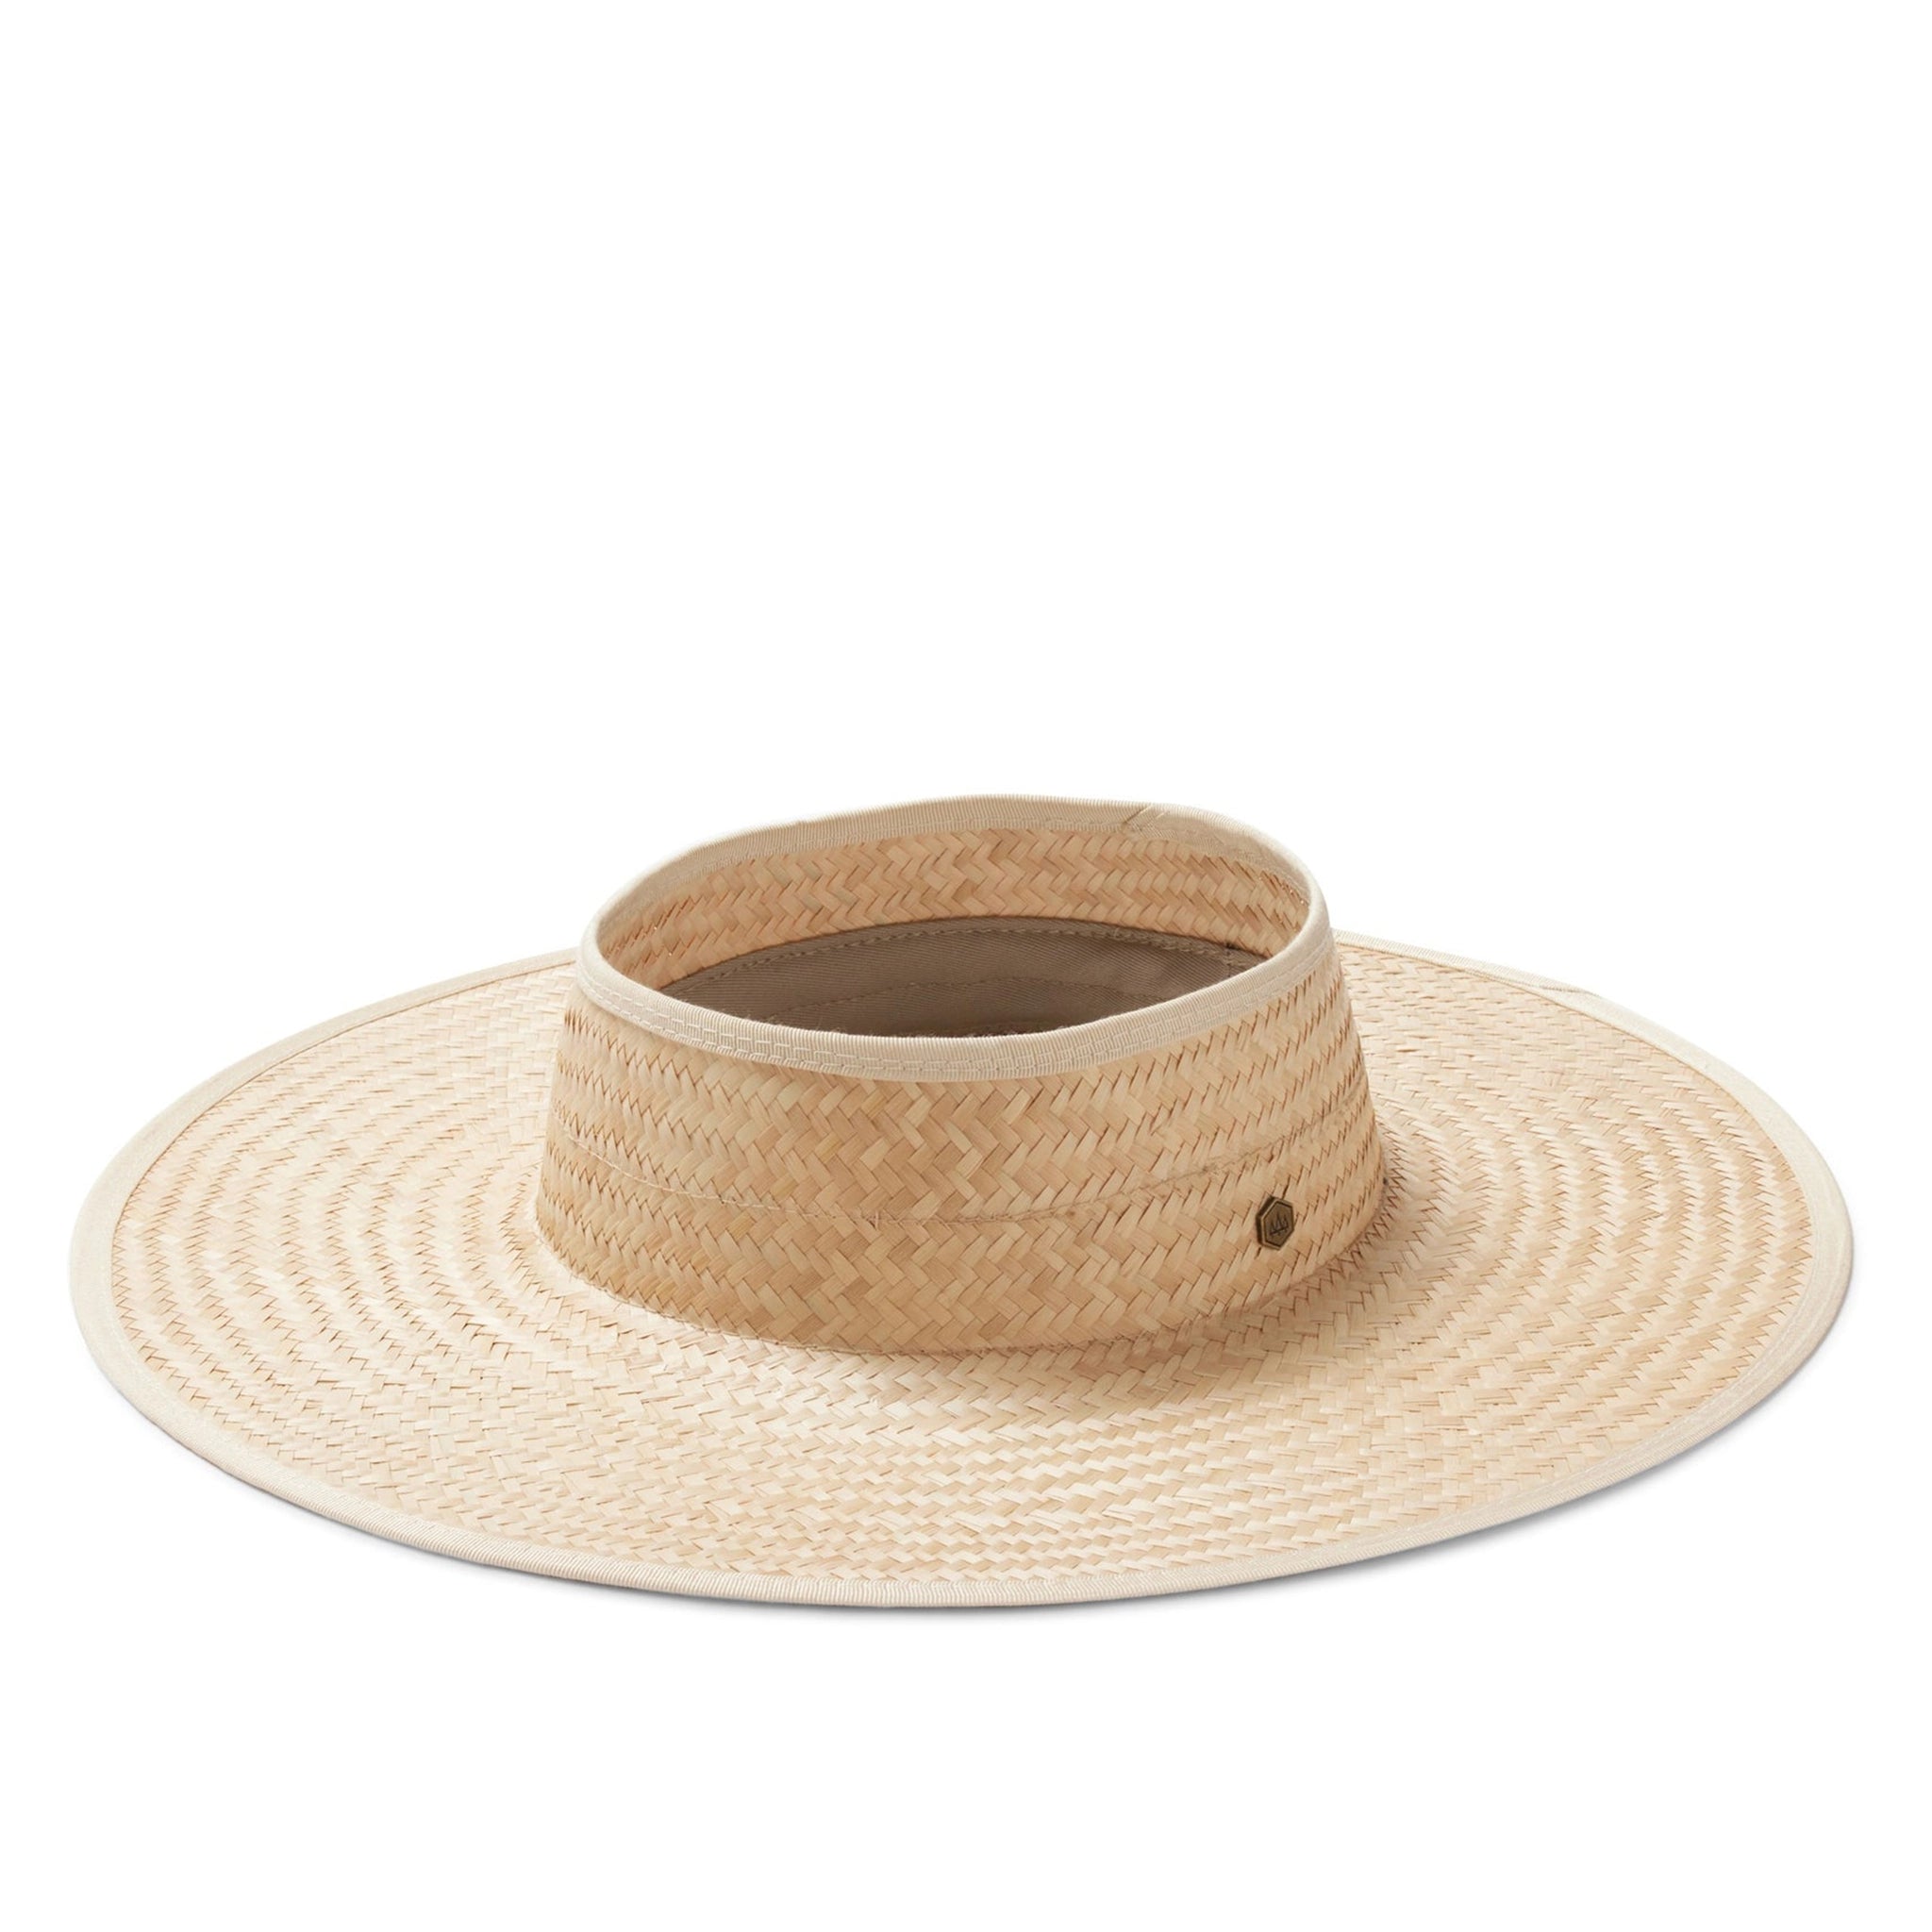 A neutral woven sun hat / visor with a white brim and a cut out at the top for your head to sit through.